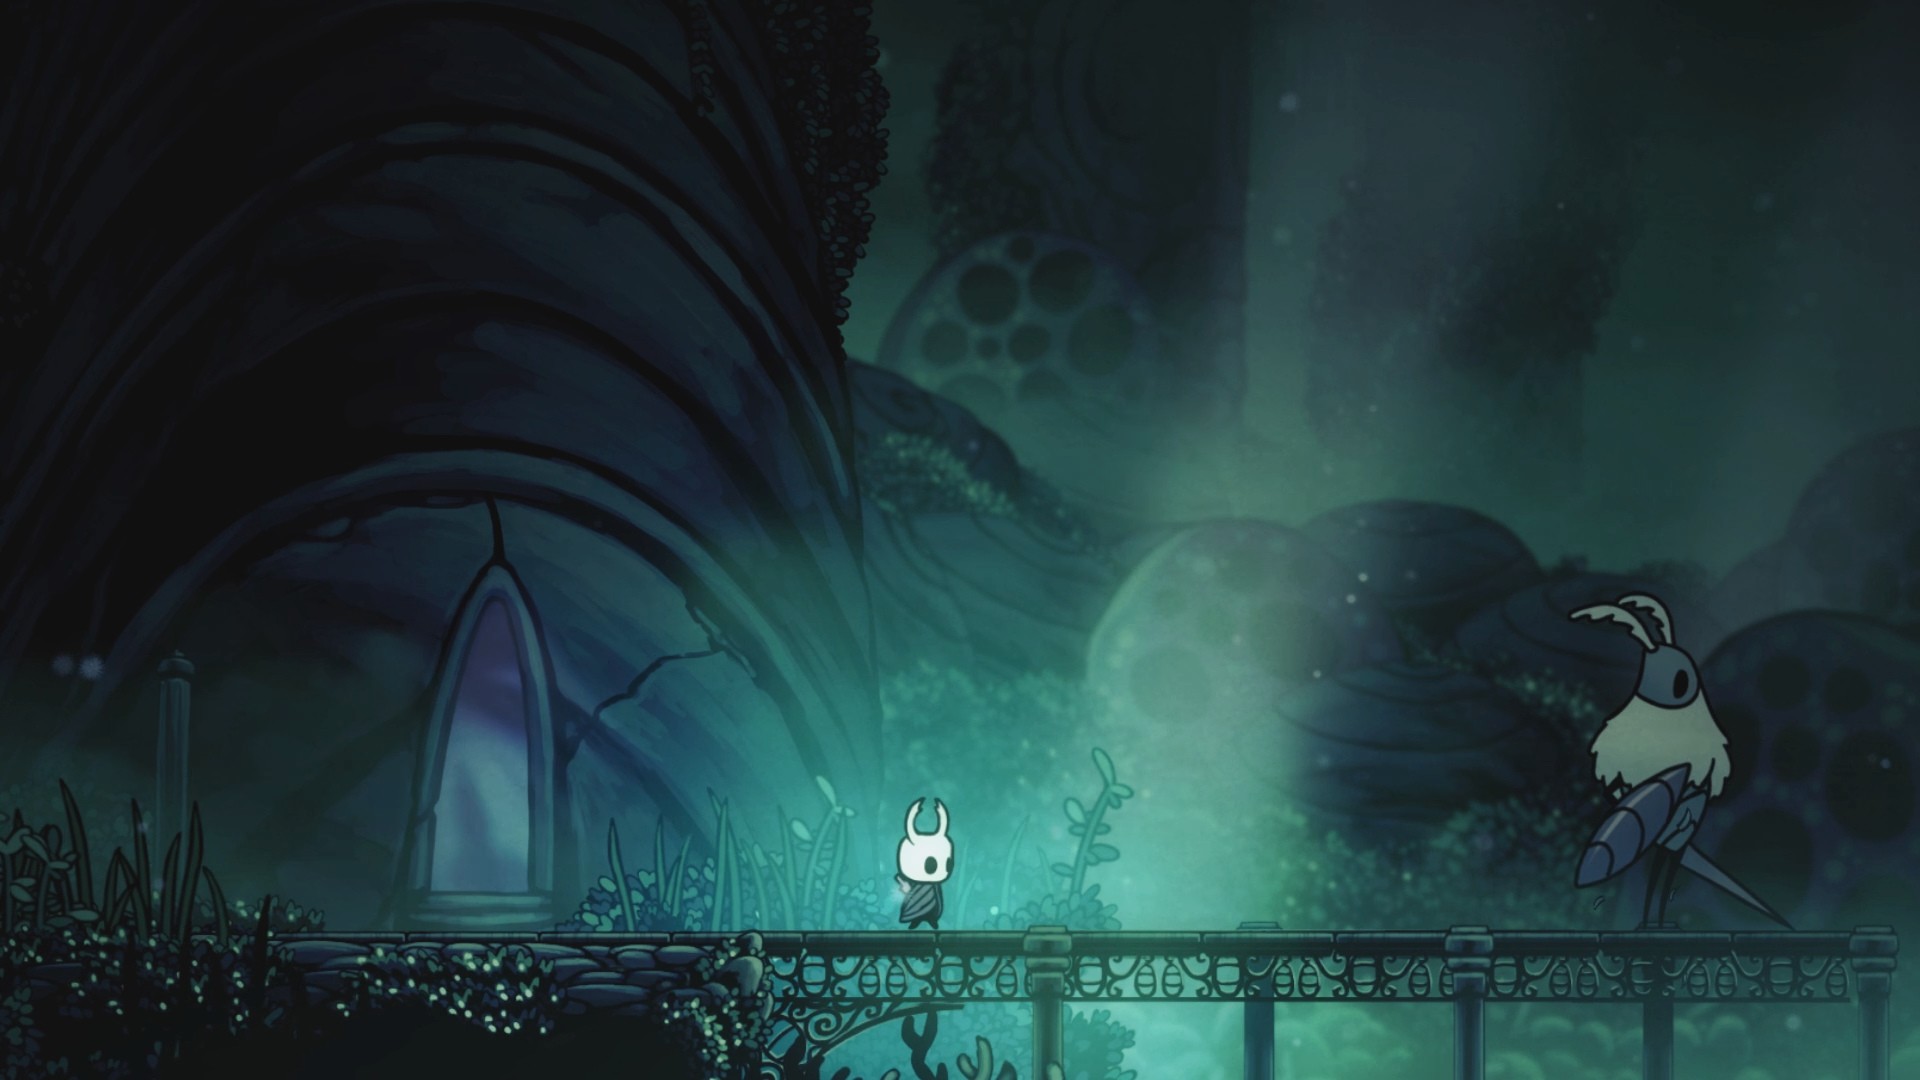 Best Hollow Knight Gameplay Wallpaper HD With high-resolution 1920X1080 pixel. You can use this wallpaper for your Desktop Computer Backgrounds, Mac Wallpapers, Android Lock screen or iPhone Screensavers and another smartphone device